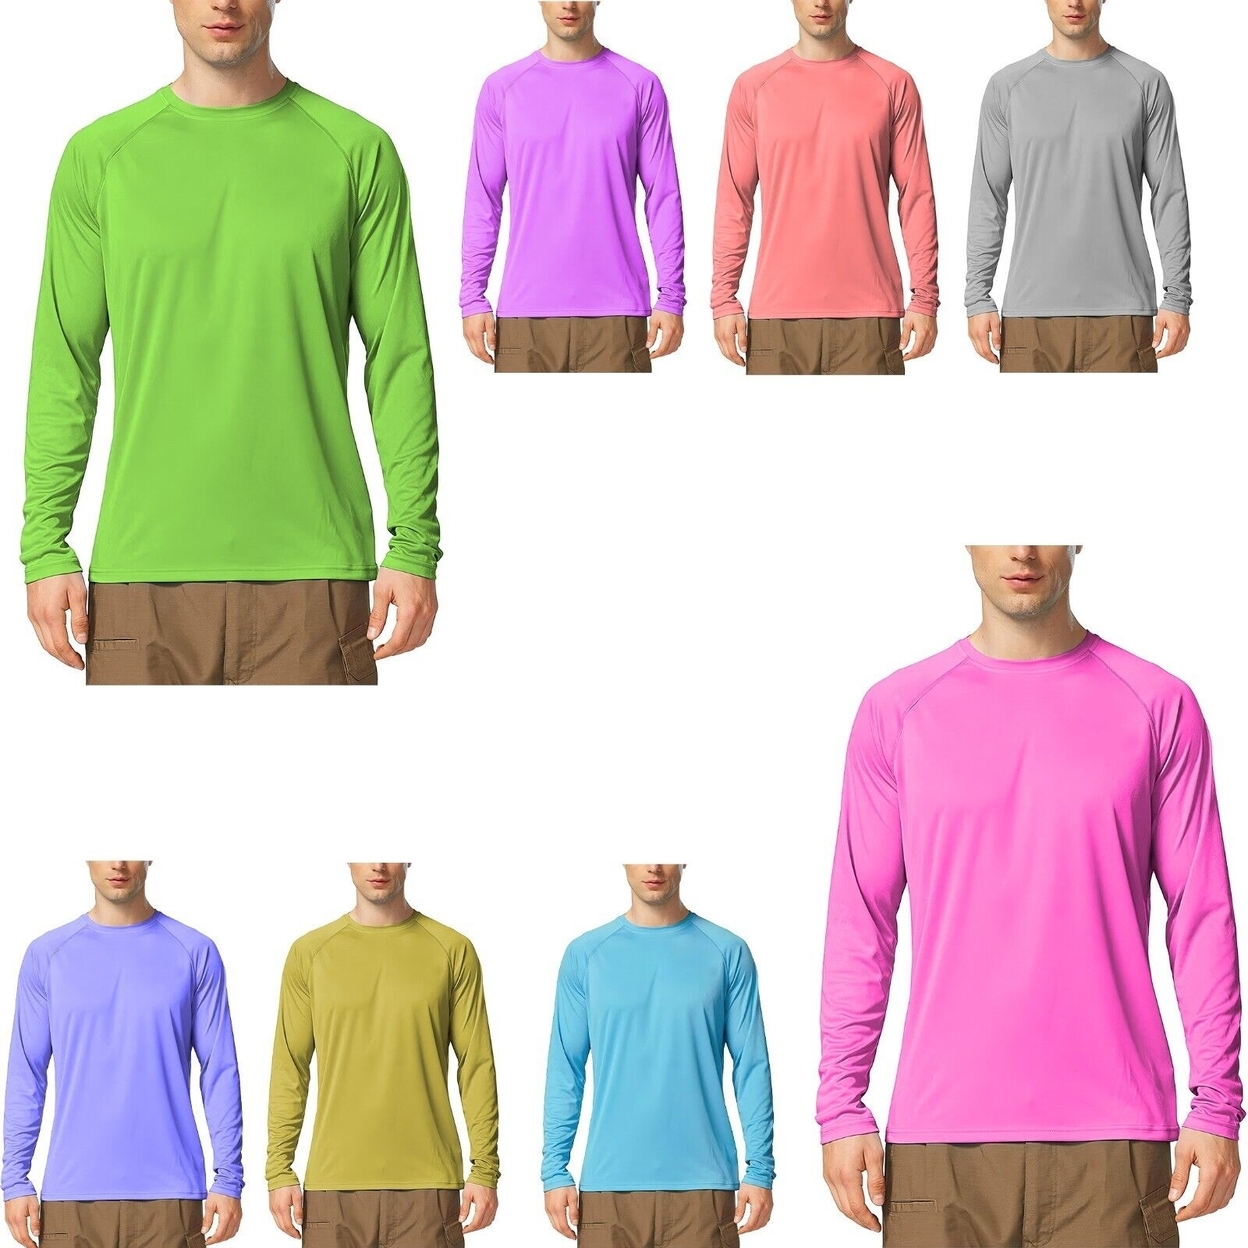 3-Pack: Men's Dri-Fit Moisture Wicking Athletic Cool Performance Slim Fit Long Sleeve T-Shirts - Large